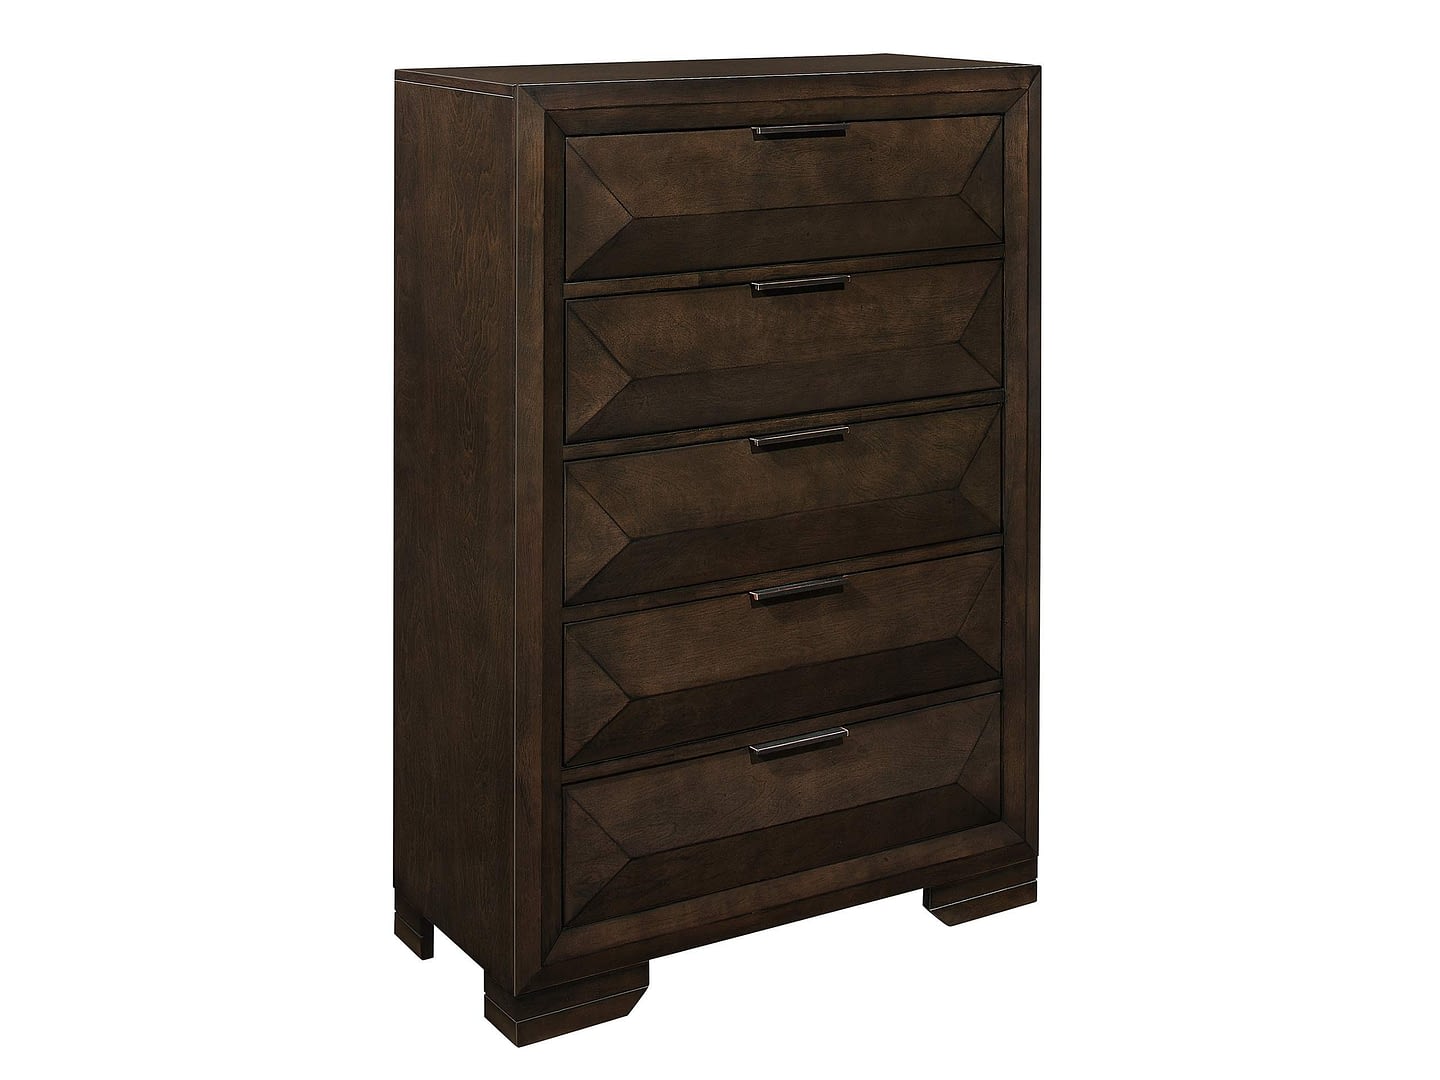 TORONTO Chest of Drawers - Side